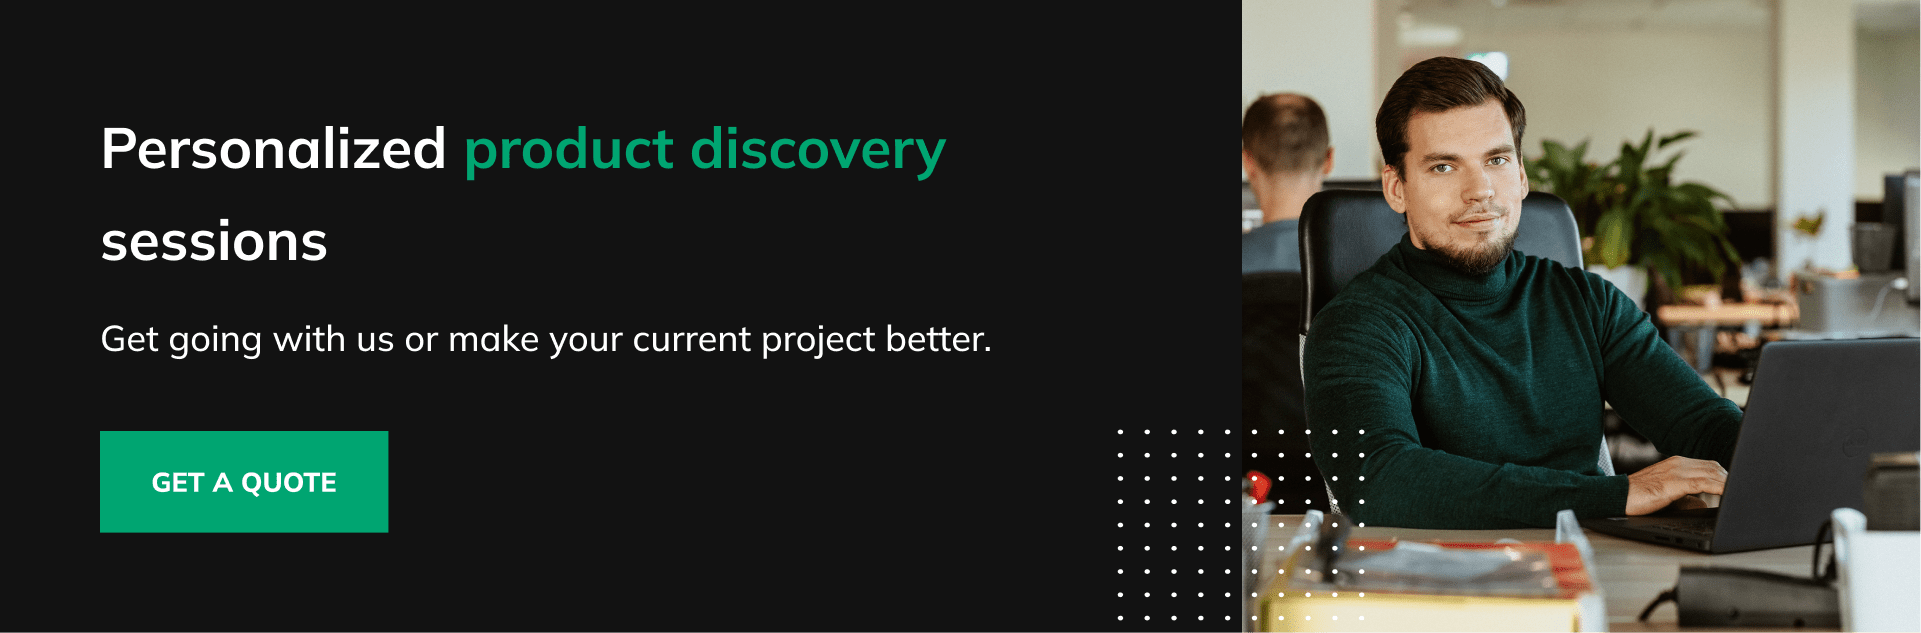 Personalized product discovery sessions